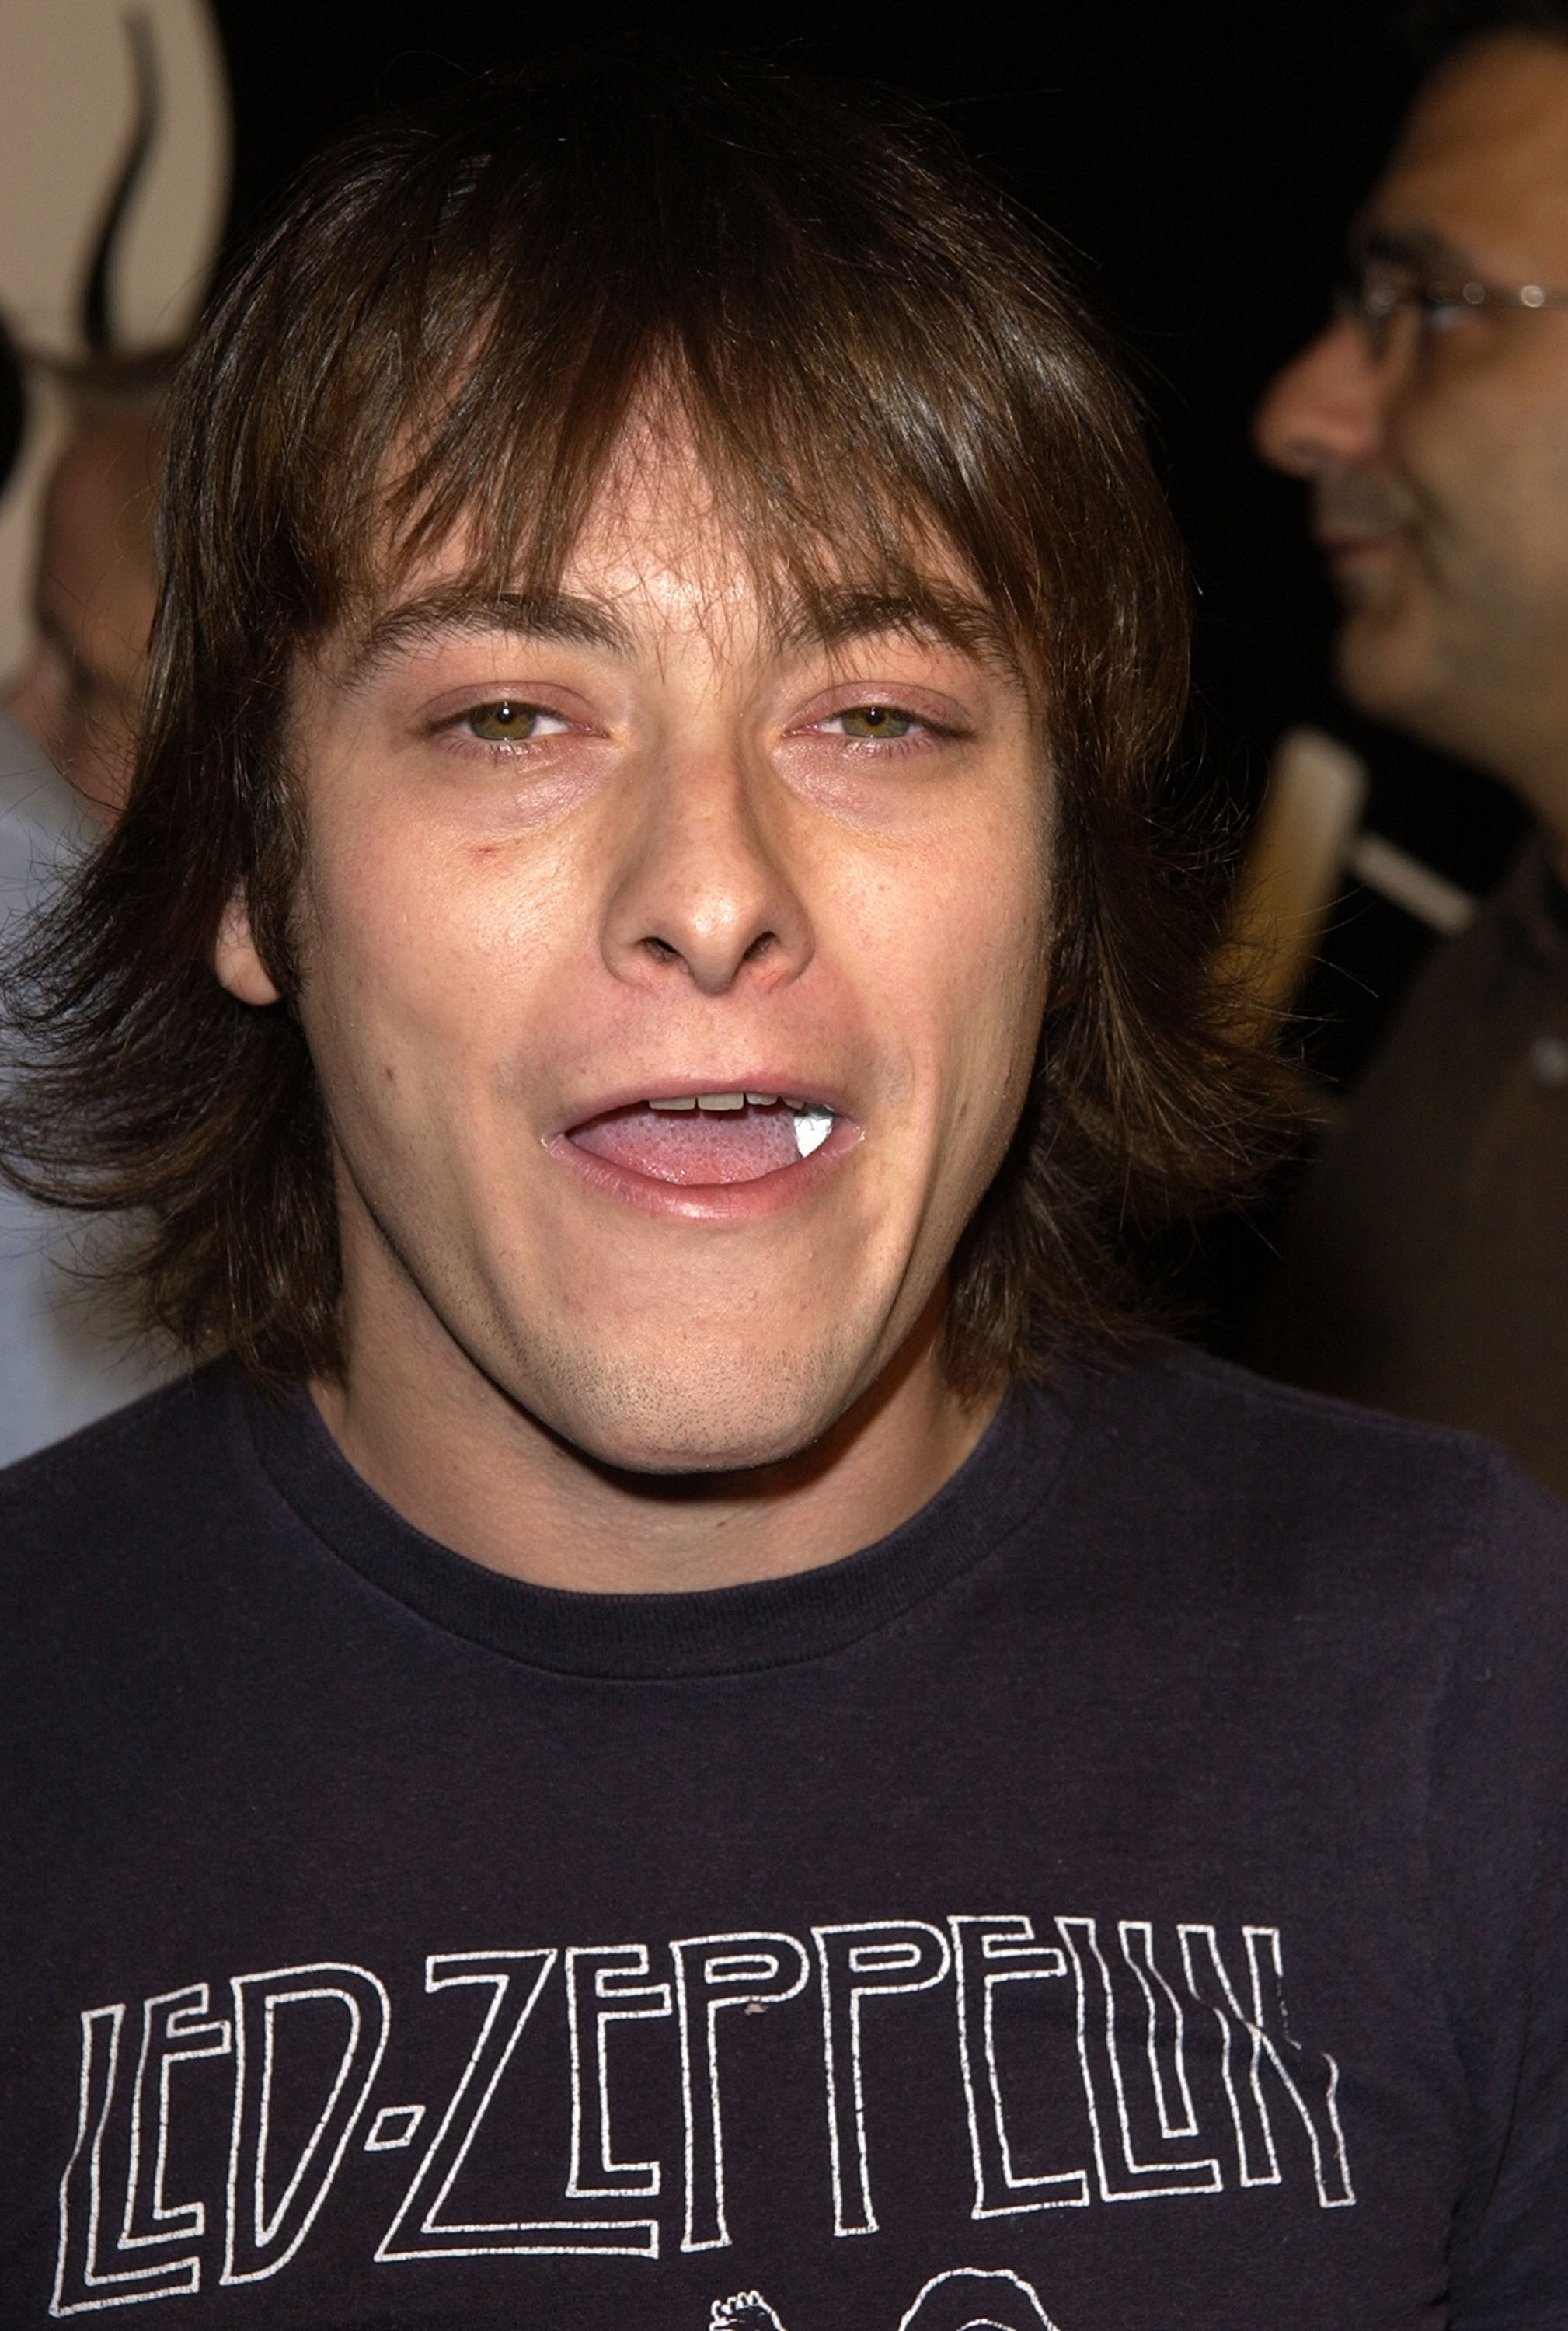 Edward Furlong during the "Jackass: The Movie" premiere in Hollywood, California, on October 21, 2002 | Source: Getty Images